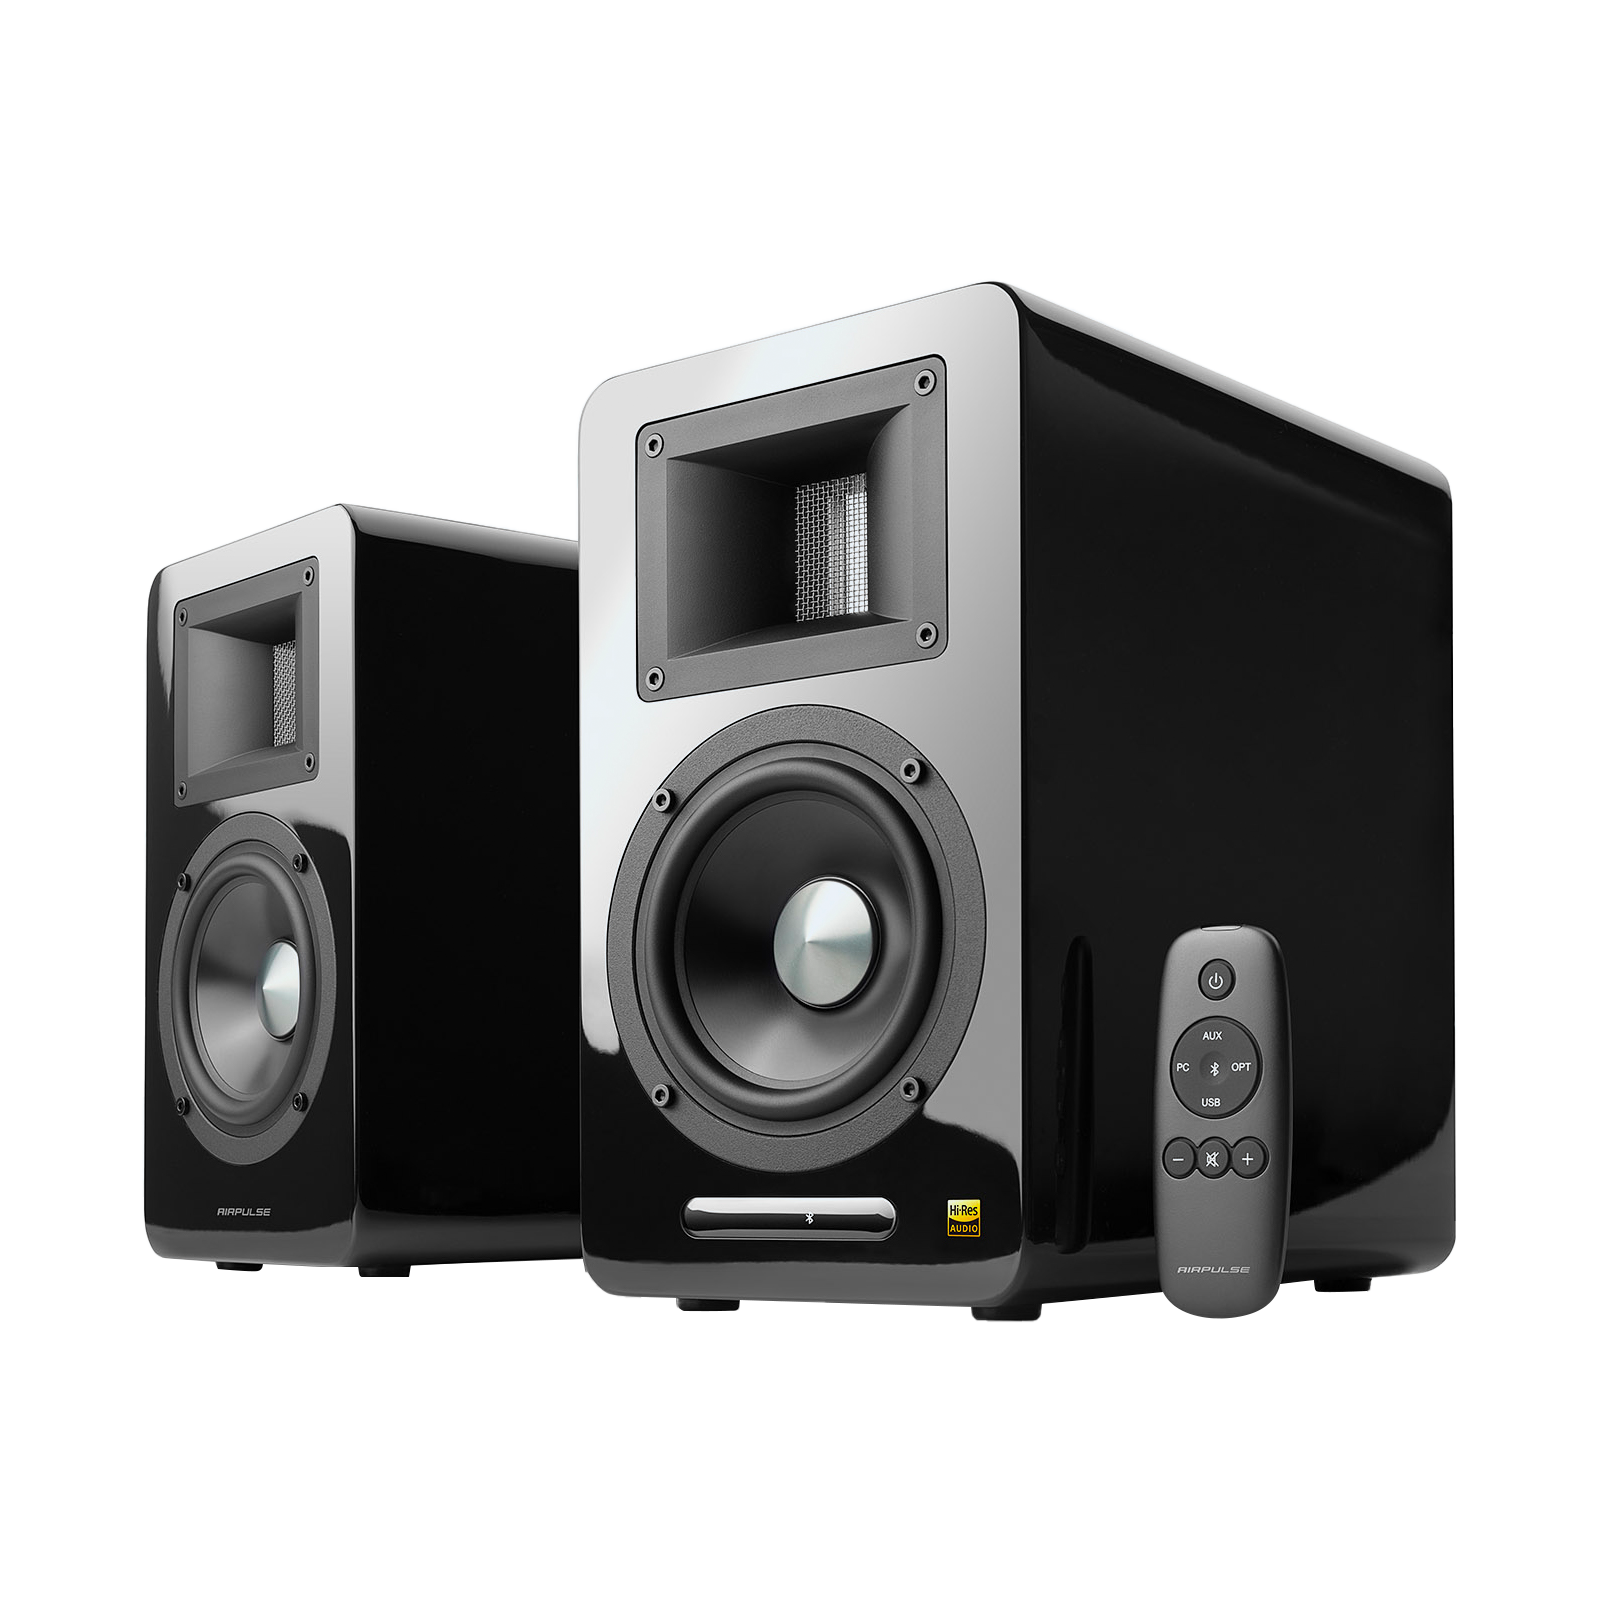 Airpulse A 100 Hi-Res Active Speaker System